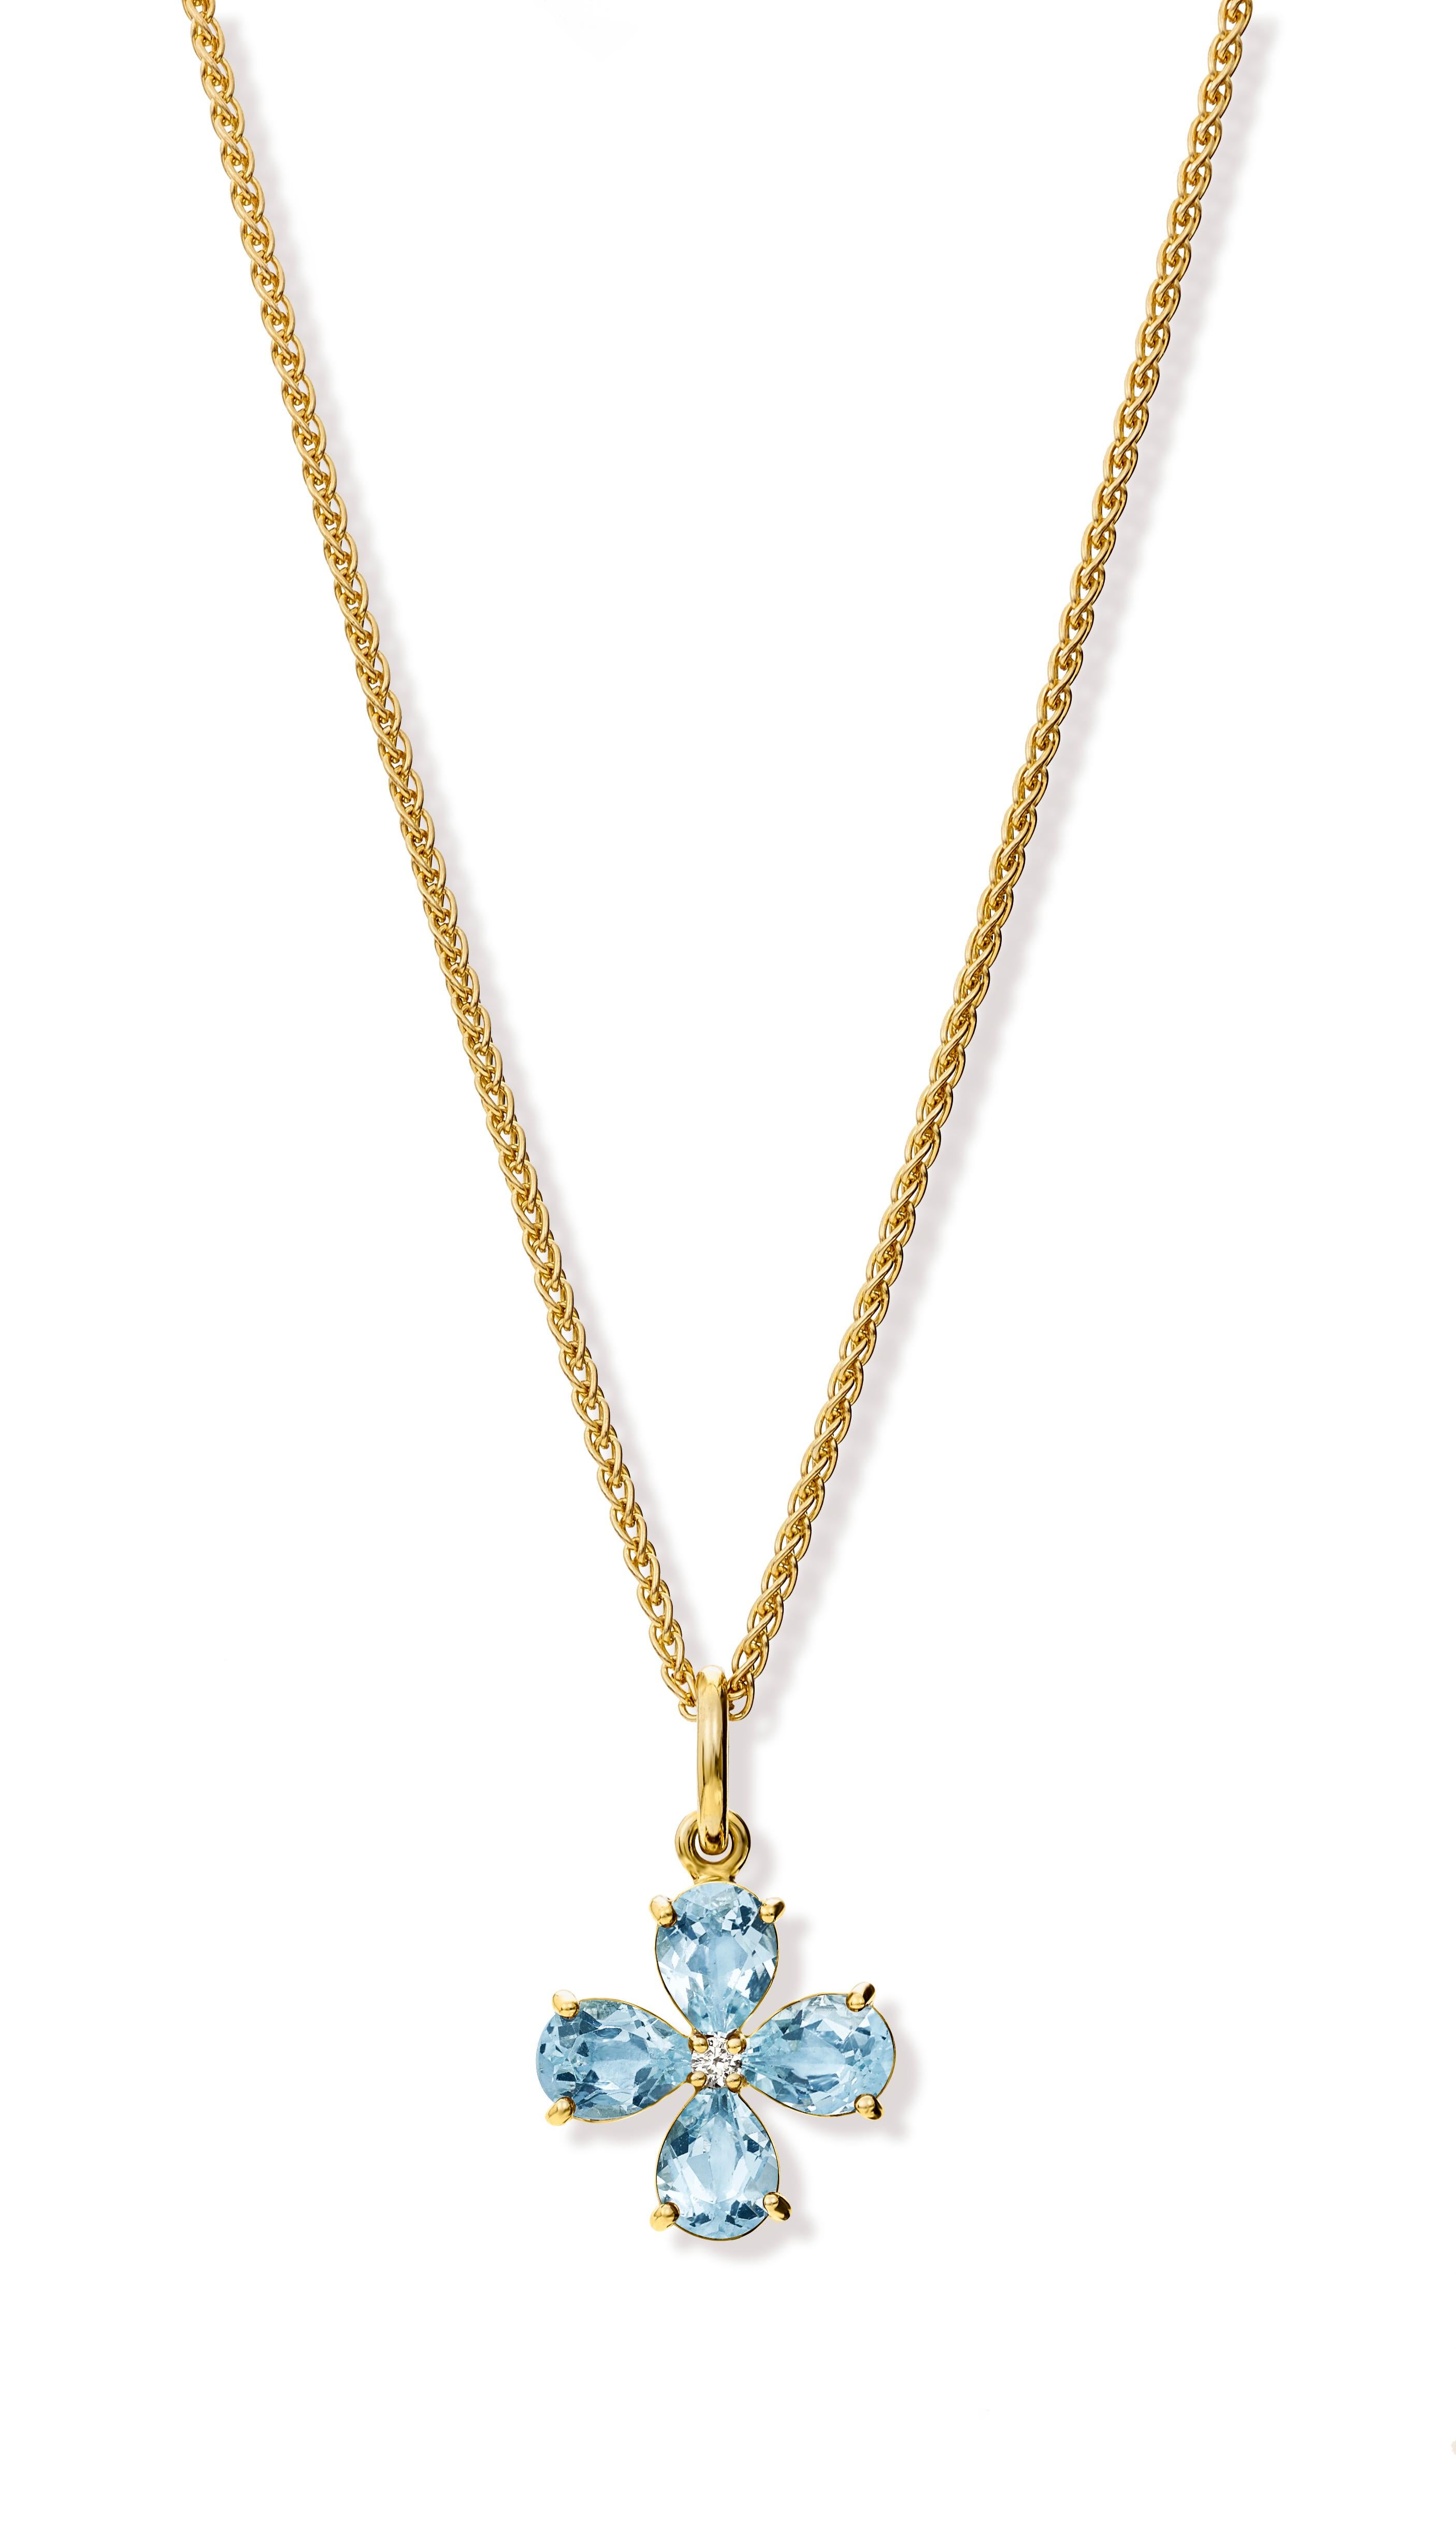 Medium Klover necklace pendant in 9 carat yellow gold set with blue topaz and a central diamond. Inspired by the four leaf Clover - the first leaf is for faith, the second is for hope, the third is for love, and the fourth is for luck.

Chain not